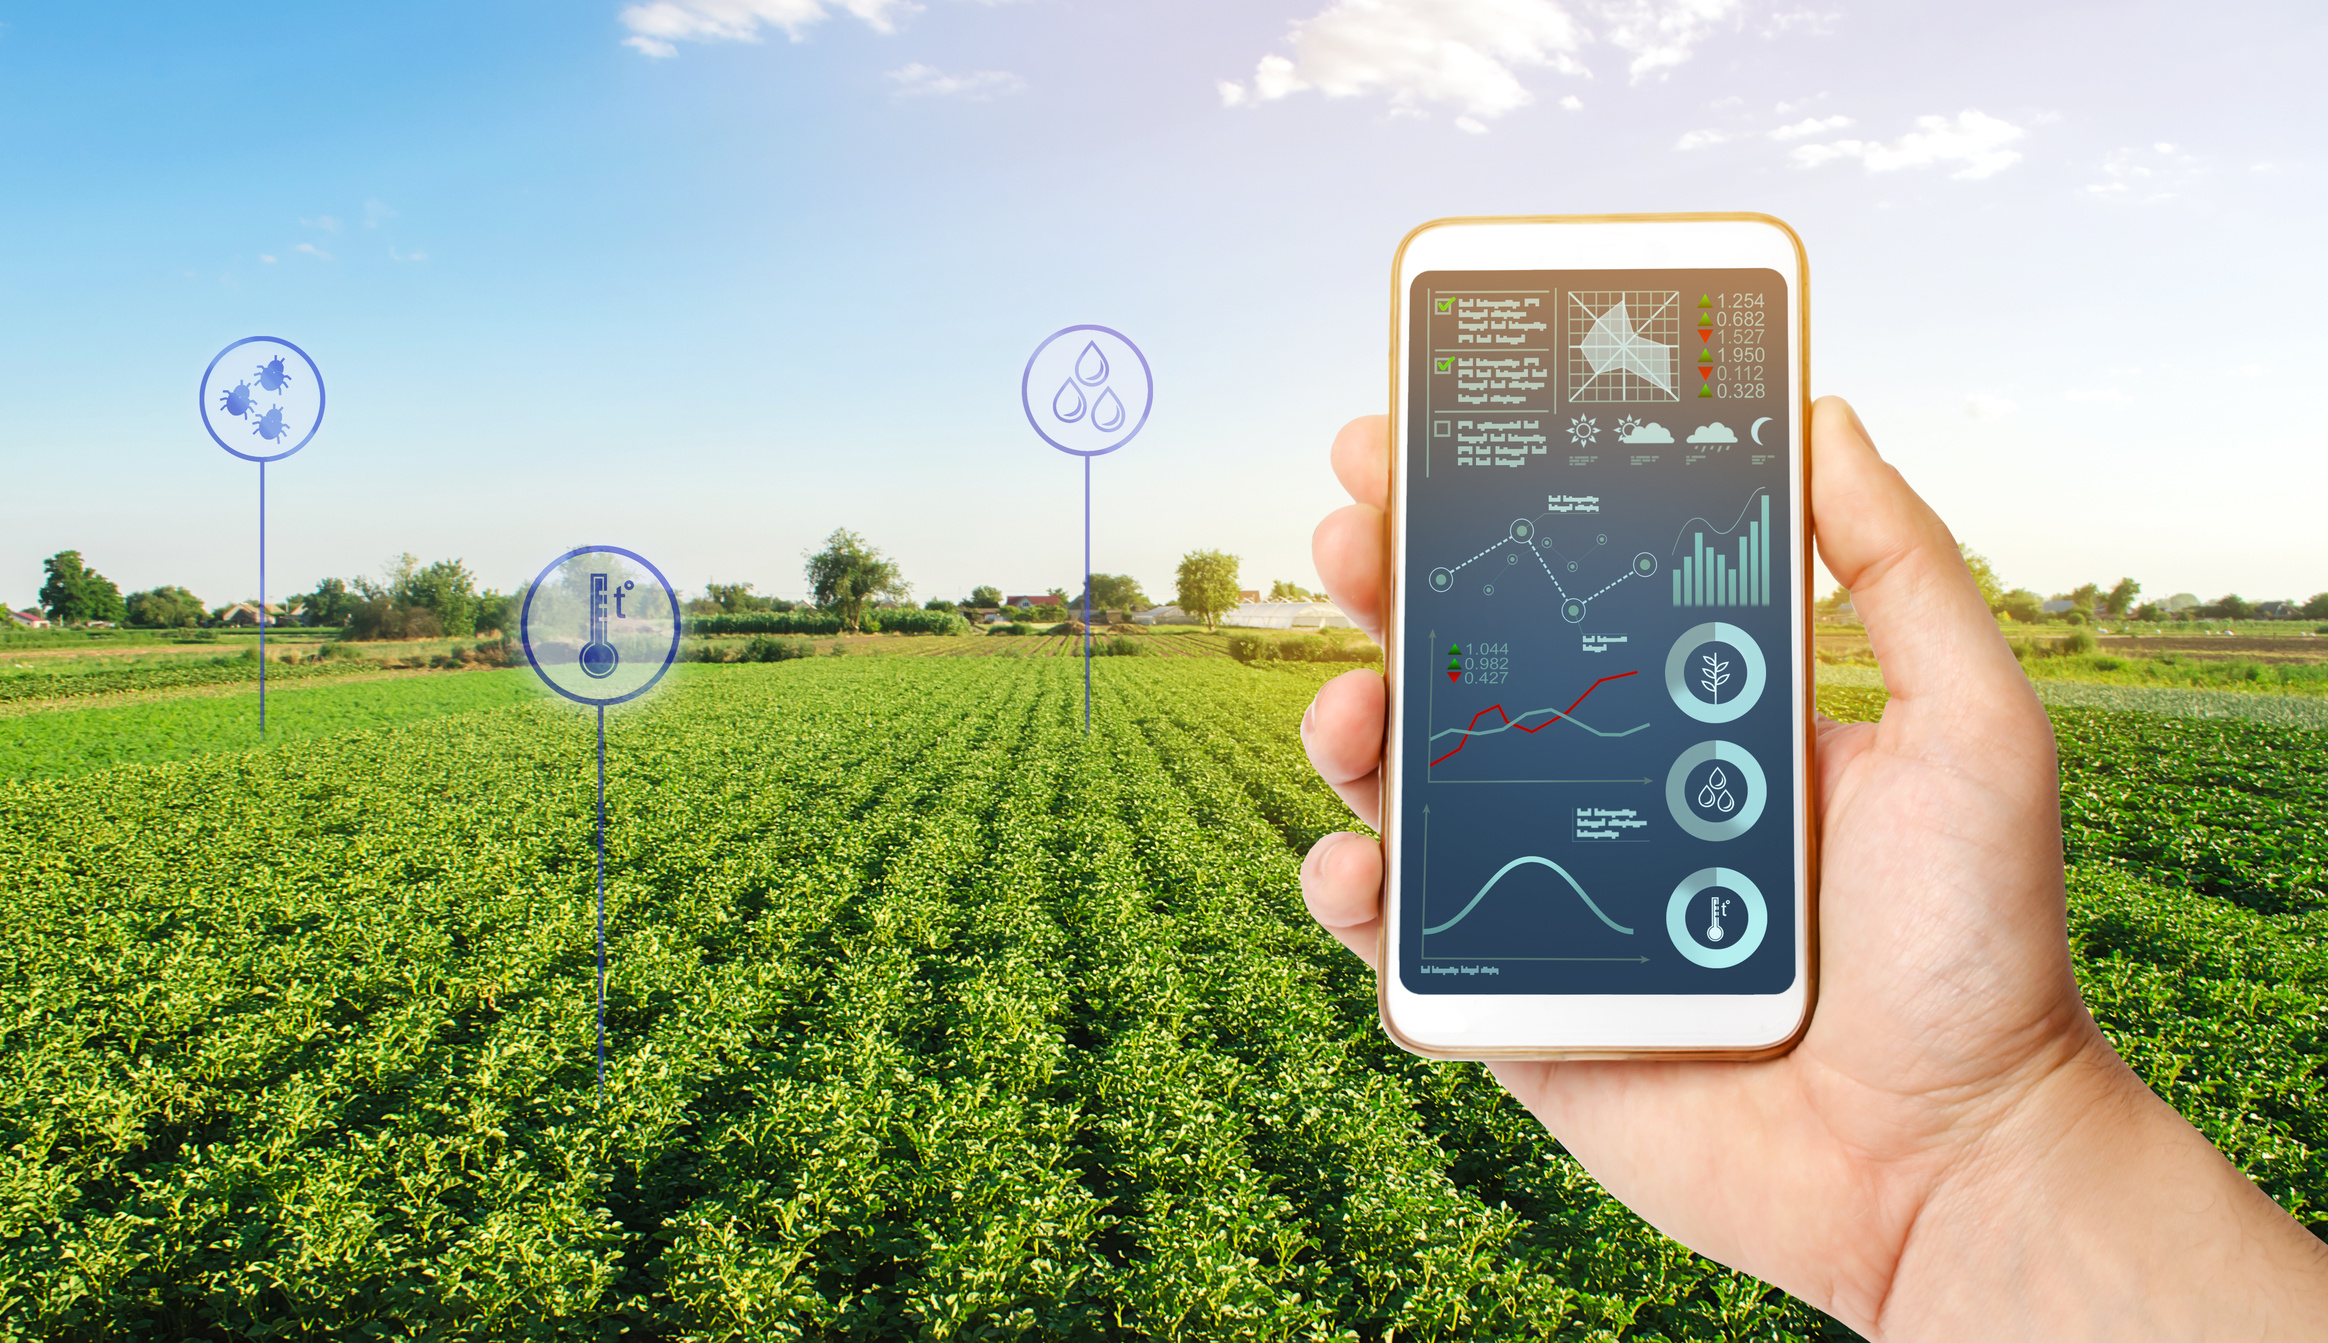 The farmer holds a phone and receives information parameters and data from agricultural field. Advanced technologies in agriculture. Agroindustry and agribusiness. Hi-tech. European organic farming.